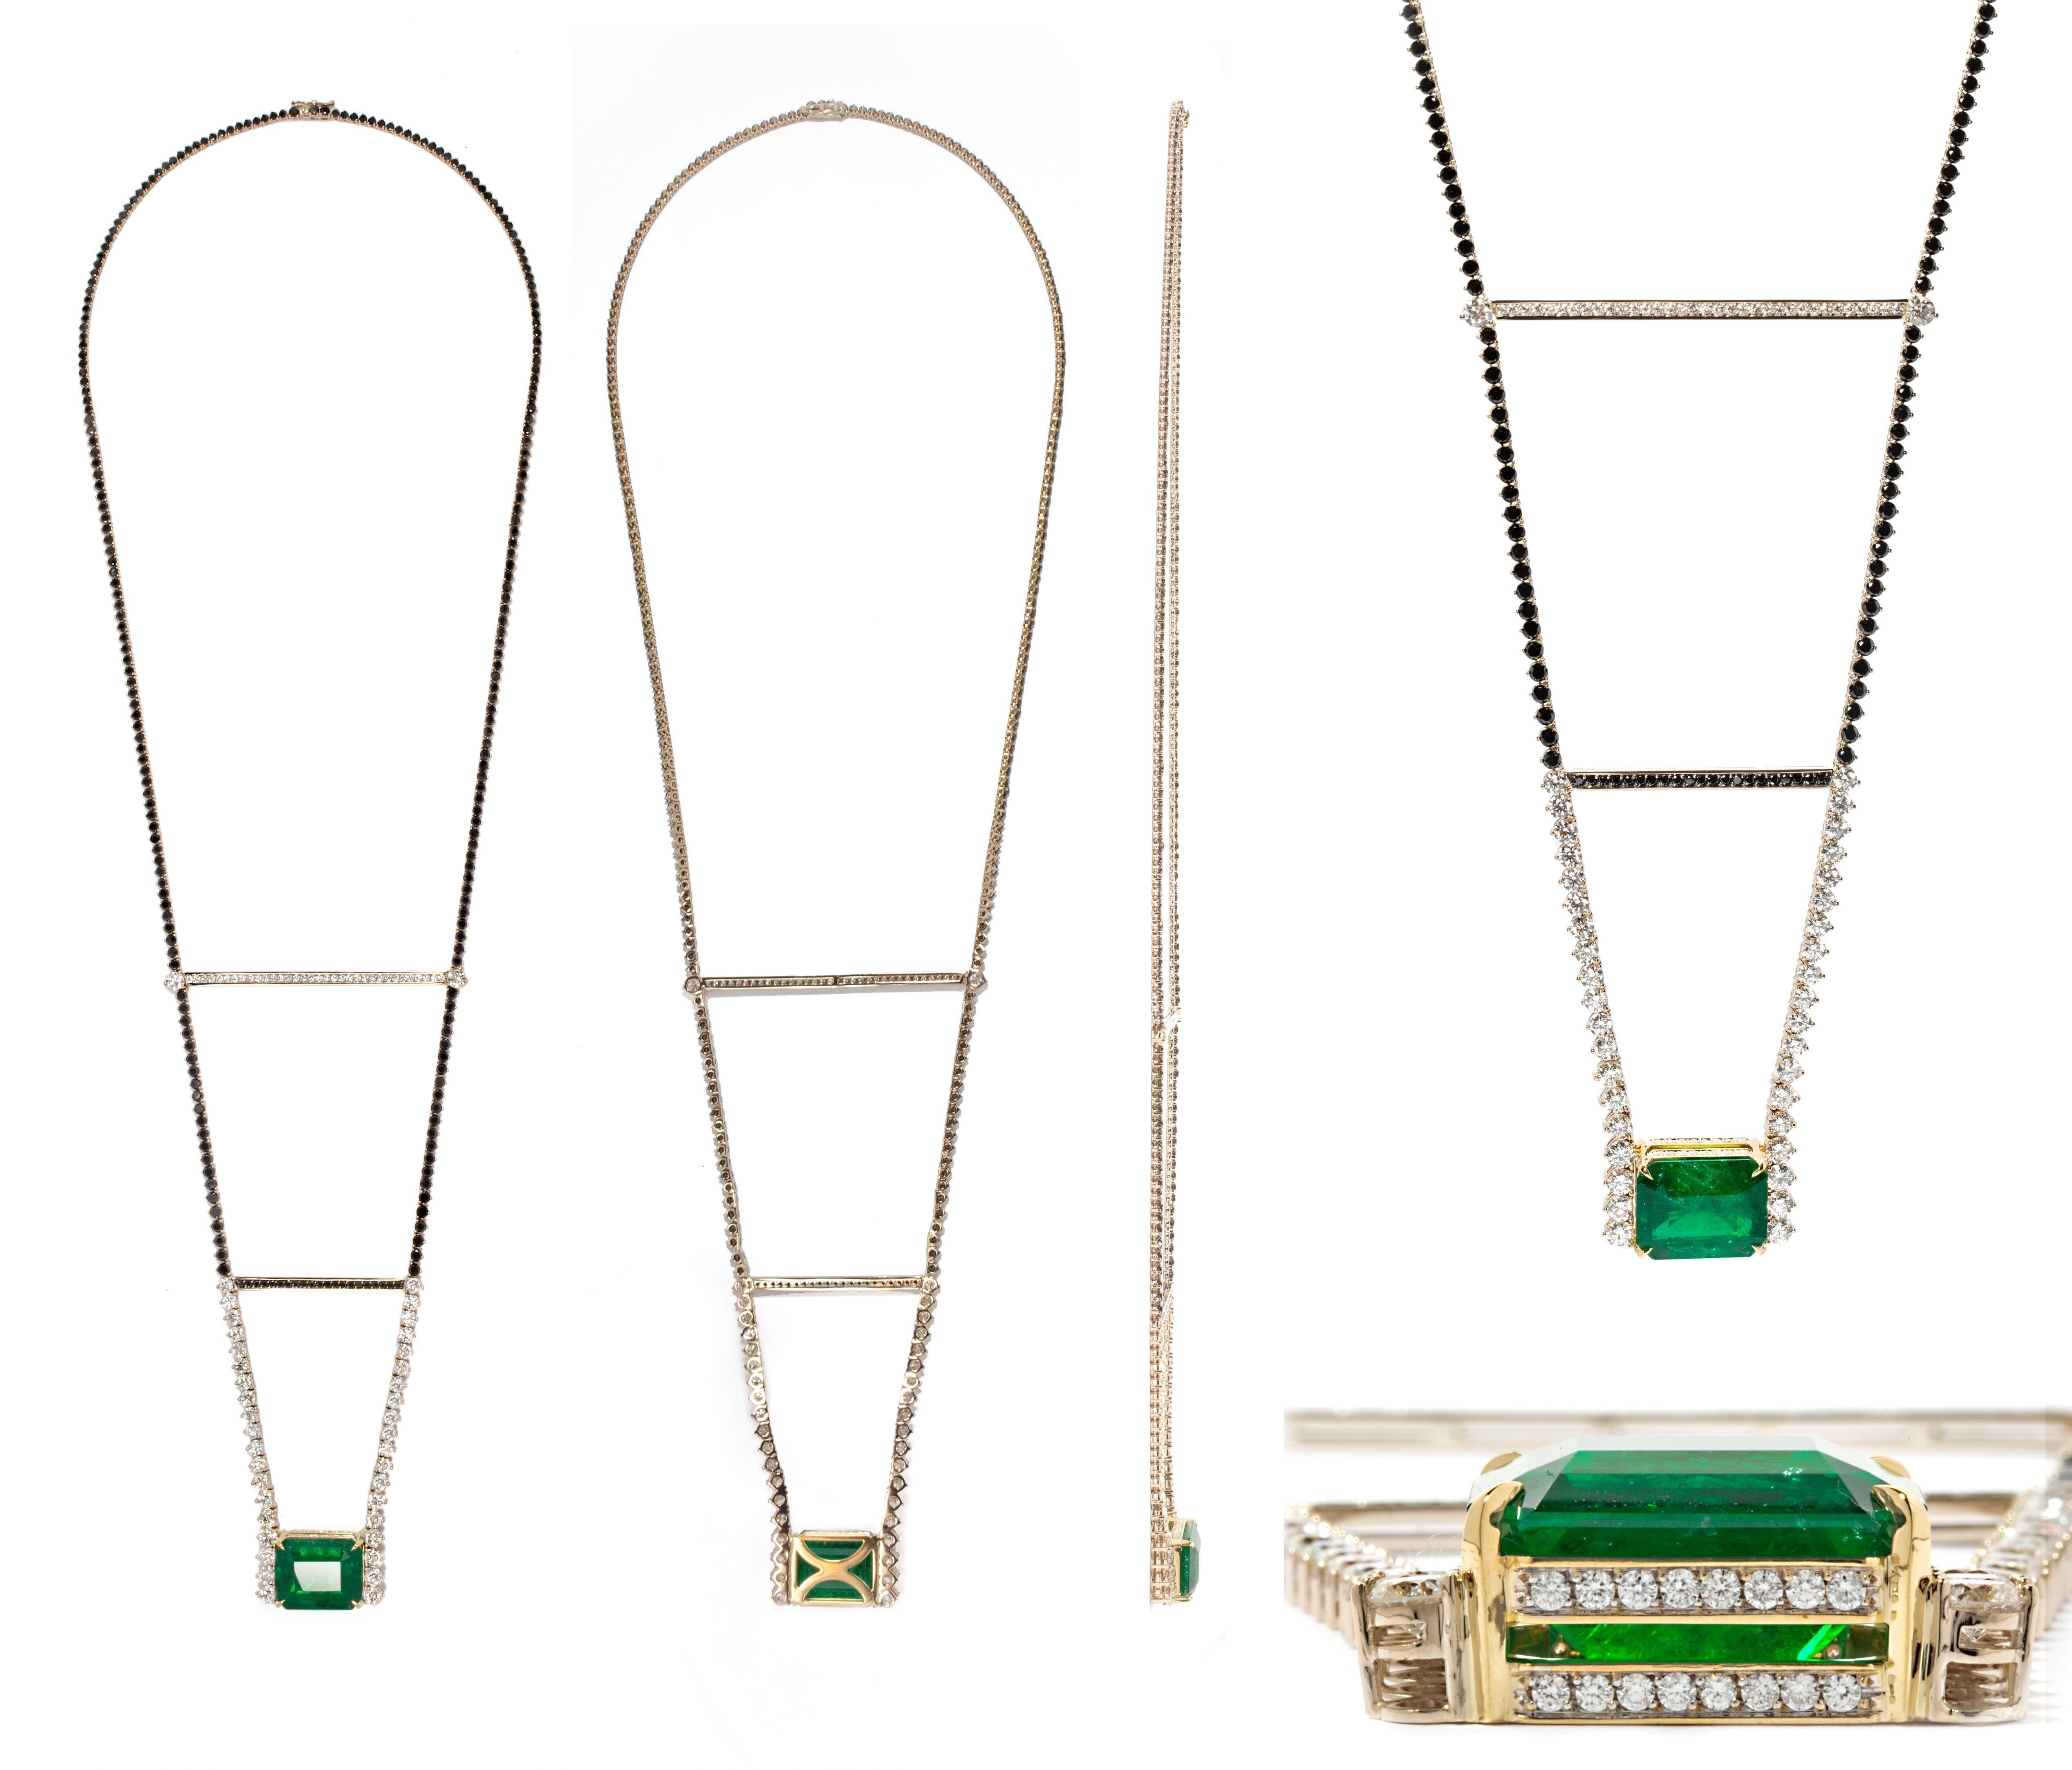 This Brazilian designed statement necklace has been exclusively designed by Ara Vartanian and was handcrafted in his Sao Paulo Atelier. This 18k White Gold Necklace features one solitaire Emerald in a octagonal faceted cut, weighing 26,44ct